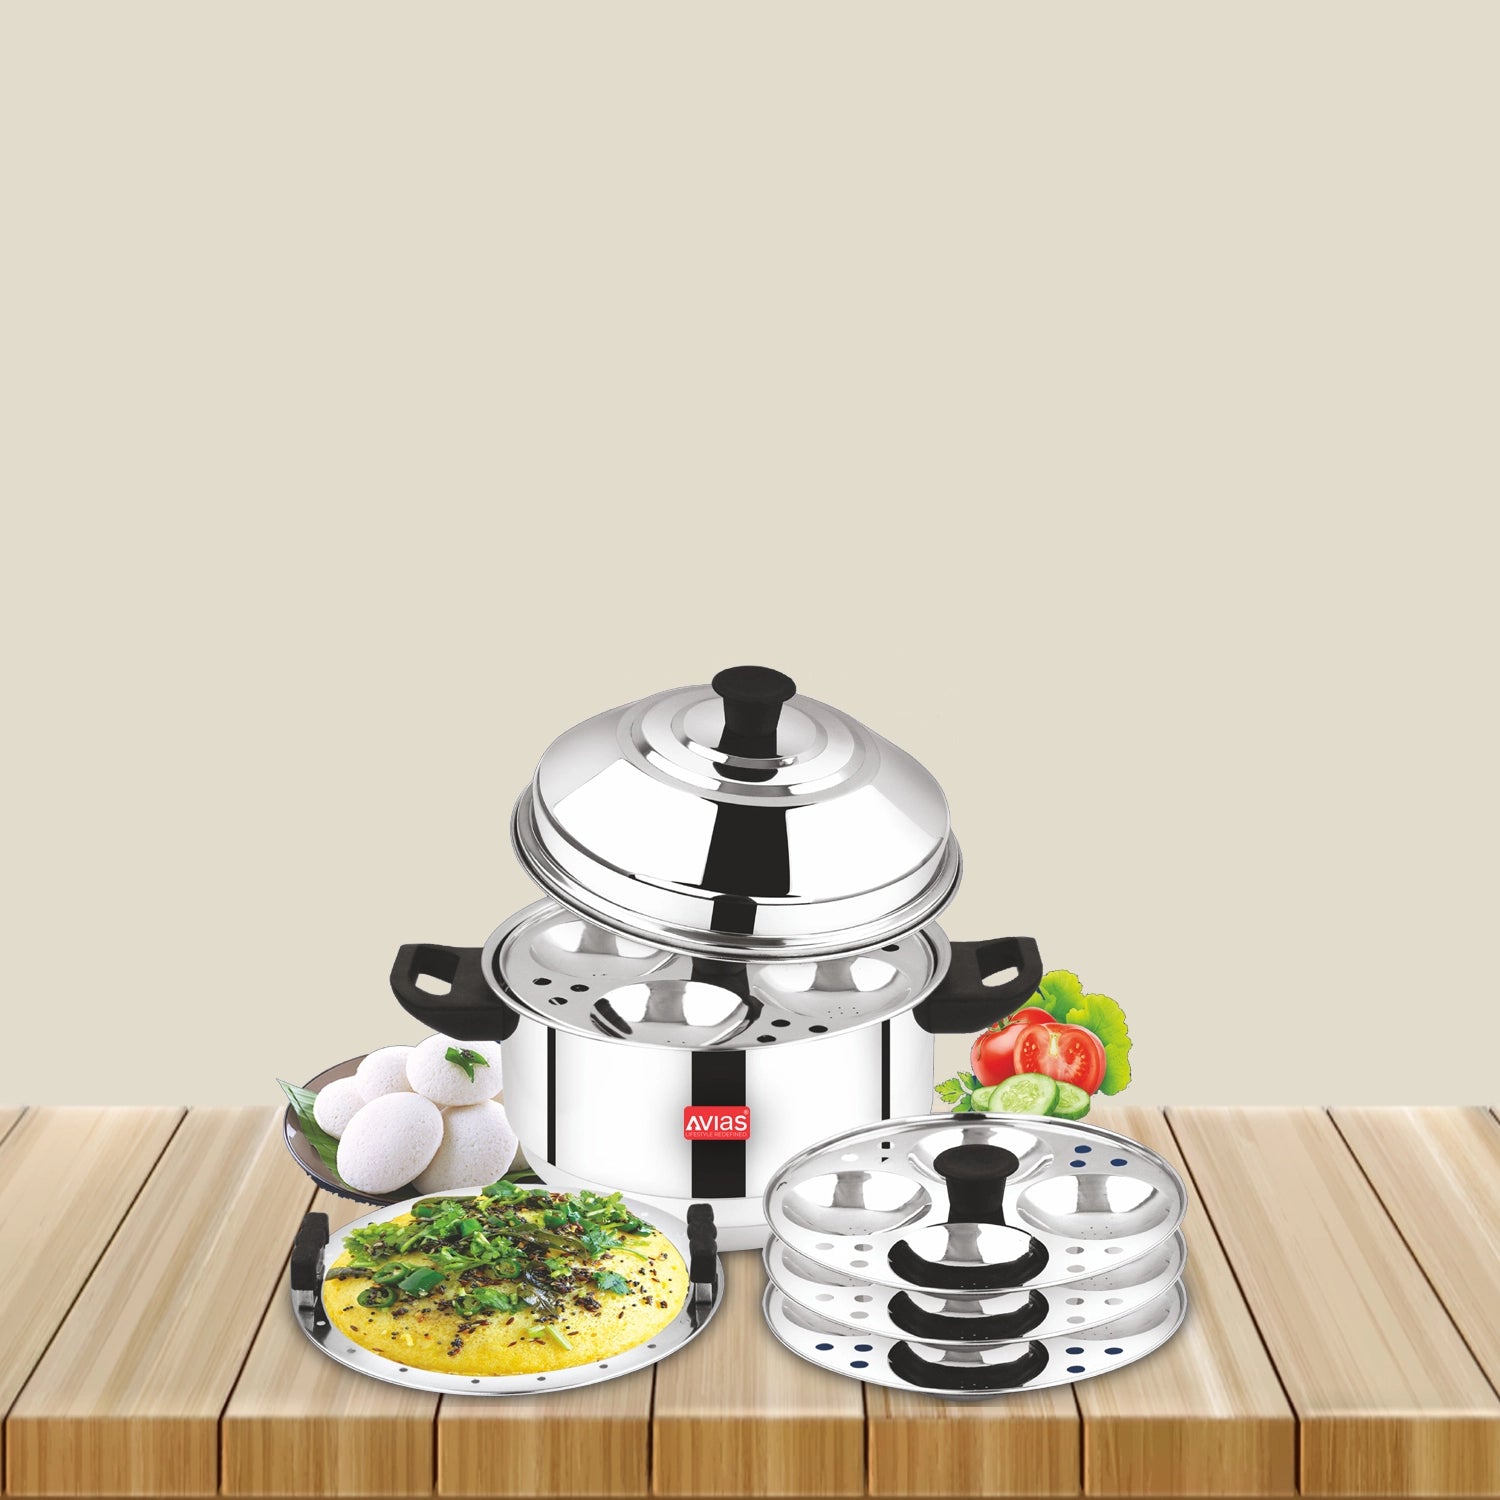 AVIAS Stainless Steel Excello Idly pot/ Cooker/ Maker